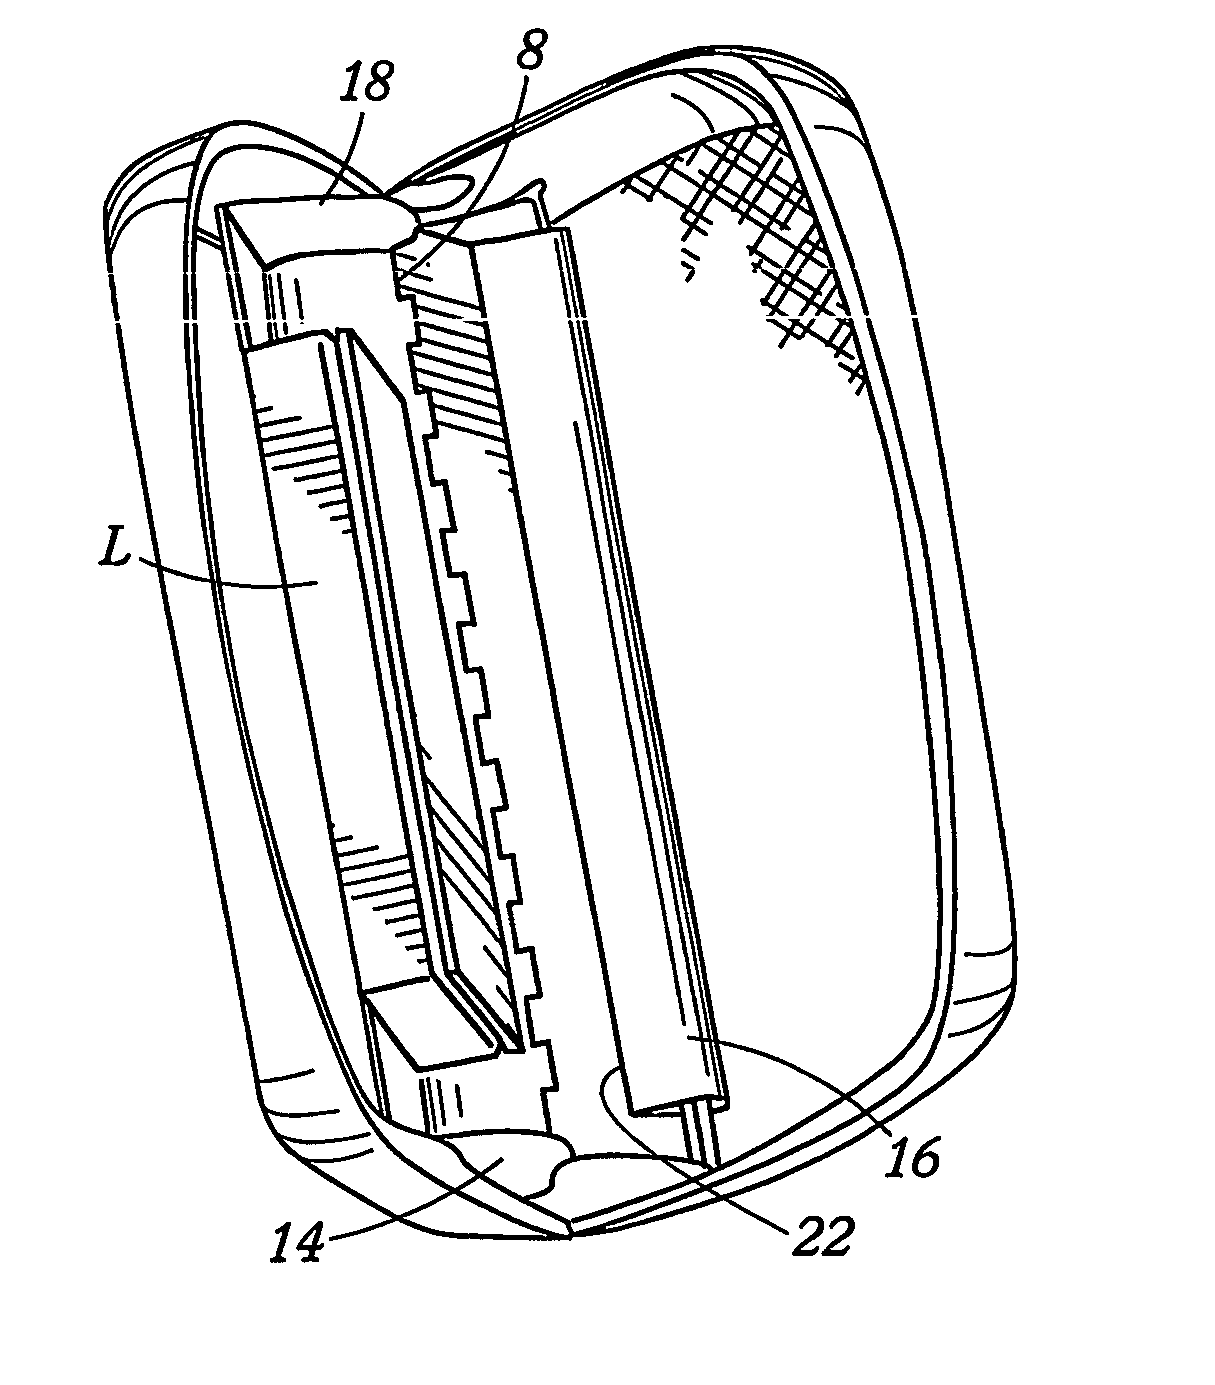 Device for holding a laptop computer in a hardside computer or attache case